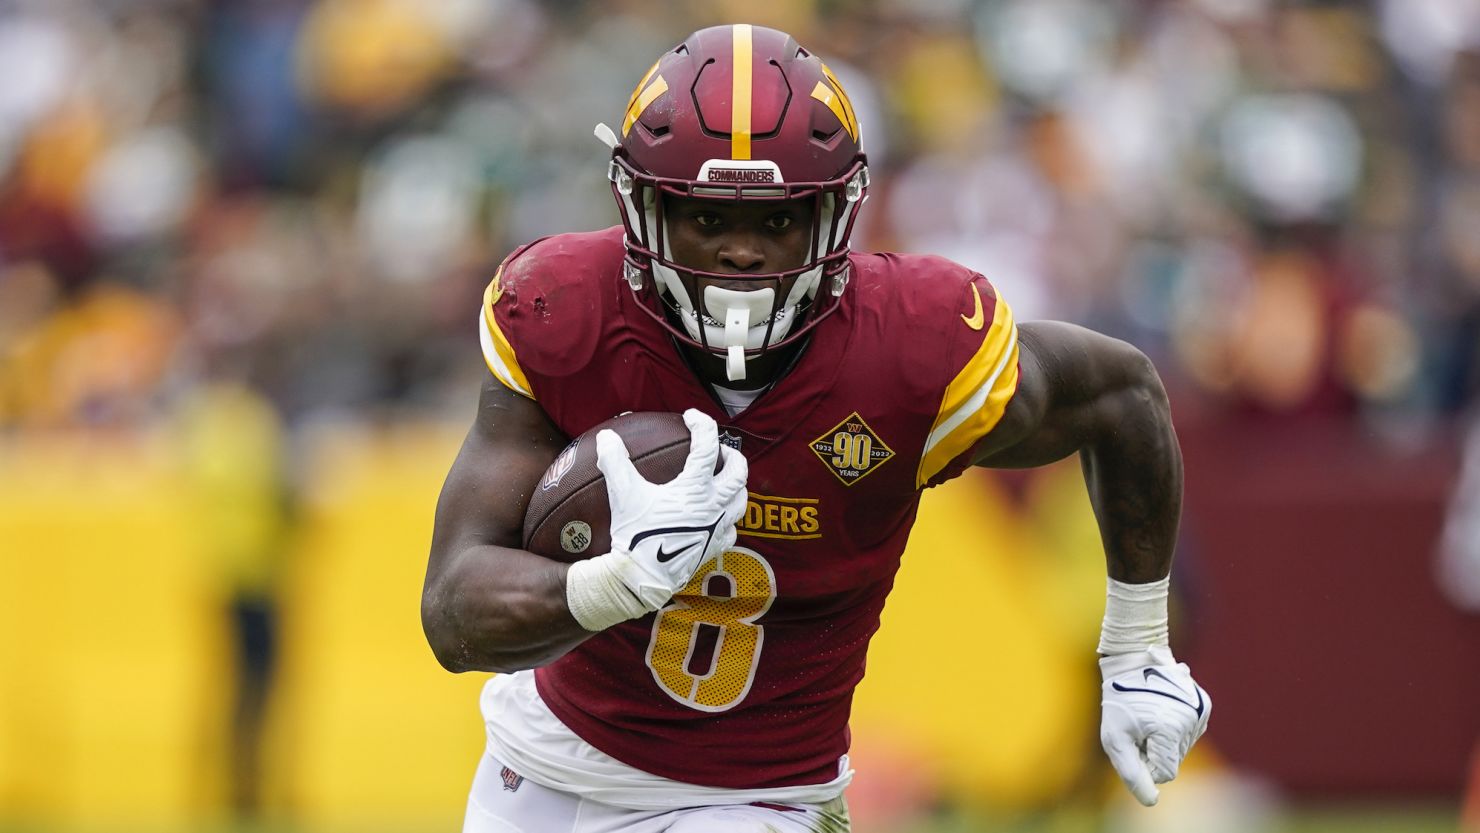 Washington Commanders running back Brian Robinson Jr. suffered two gunshot wounds in August during an attempted robbery.